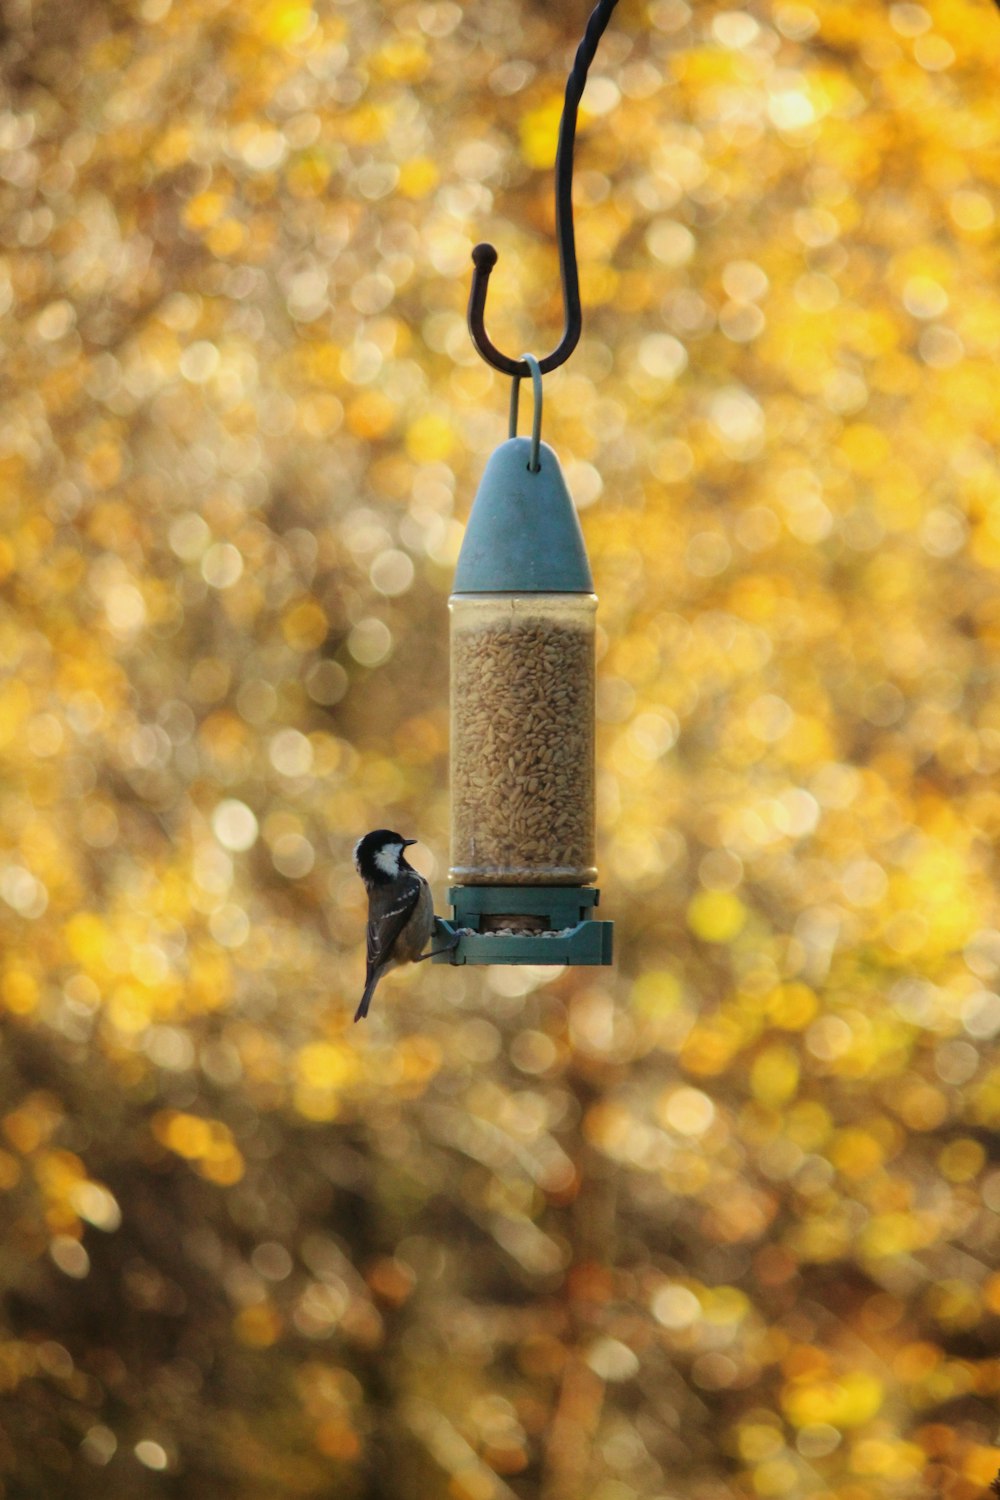 a blue bird feeder hanging from a tree